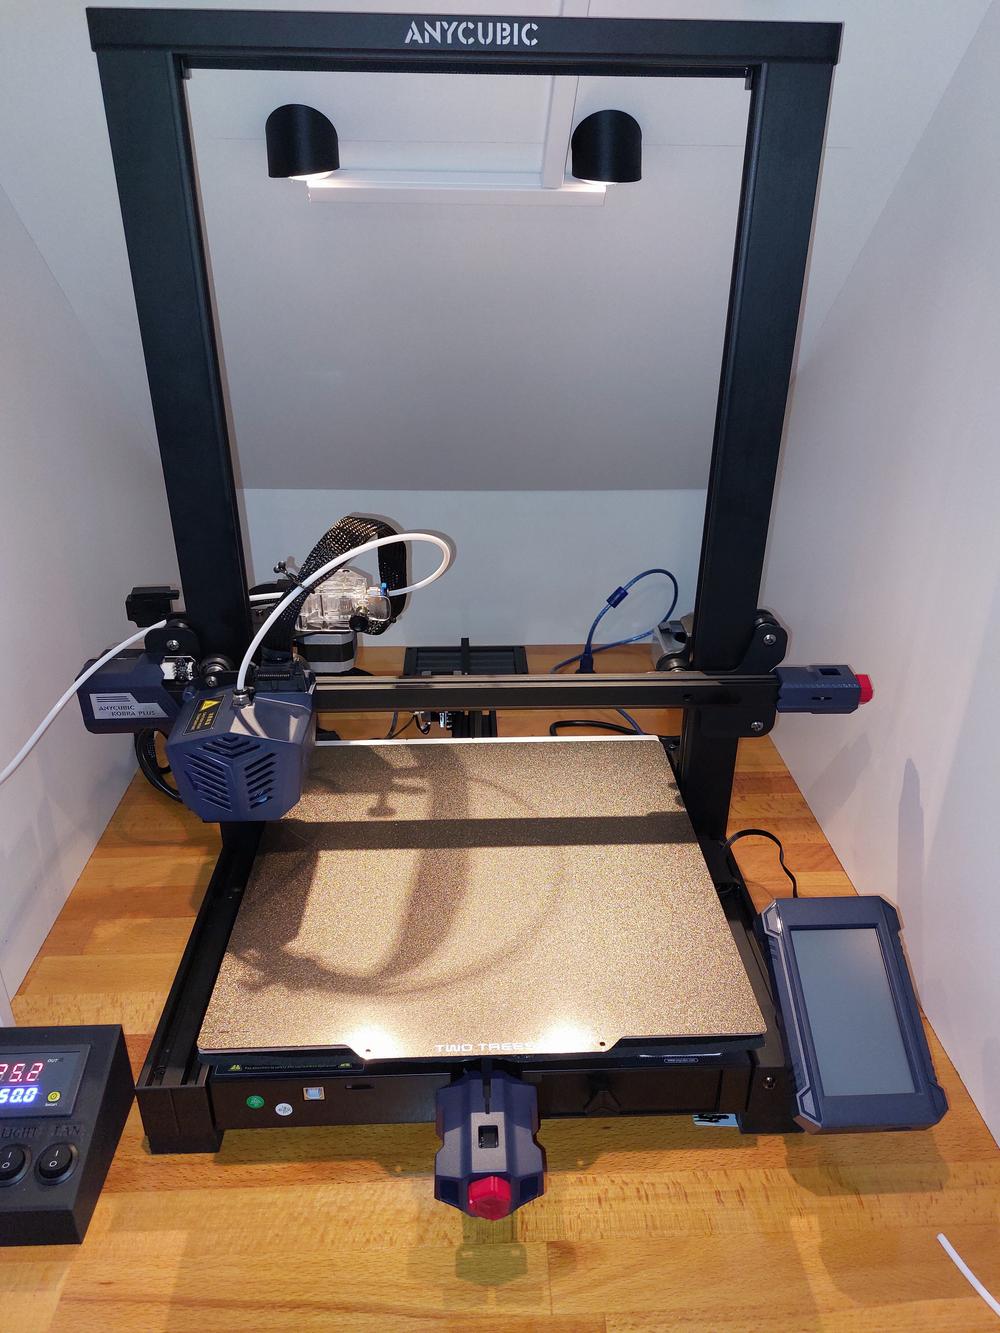 A black and grey 3D printer with a build platform, control panel, and two LED lights.